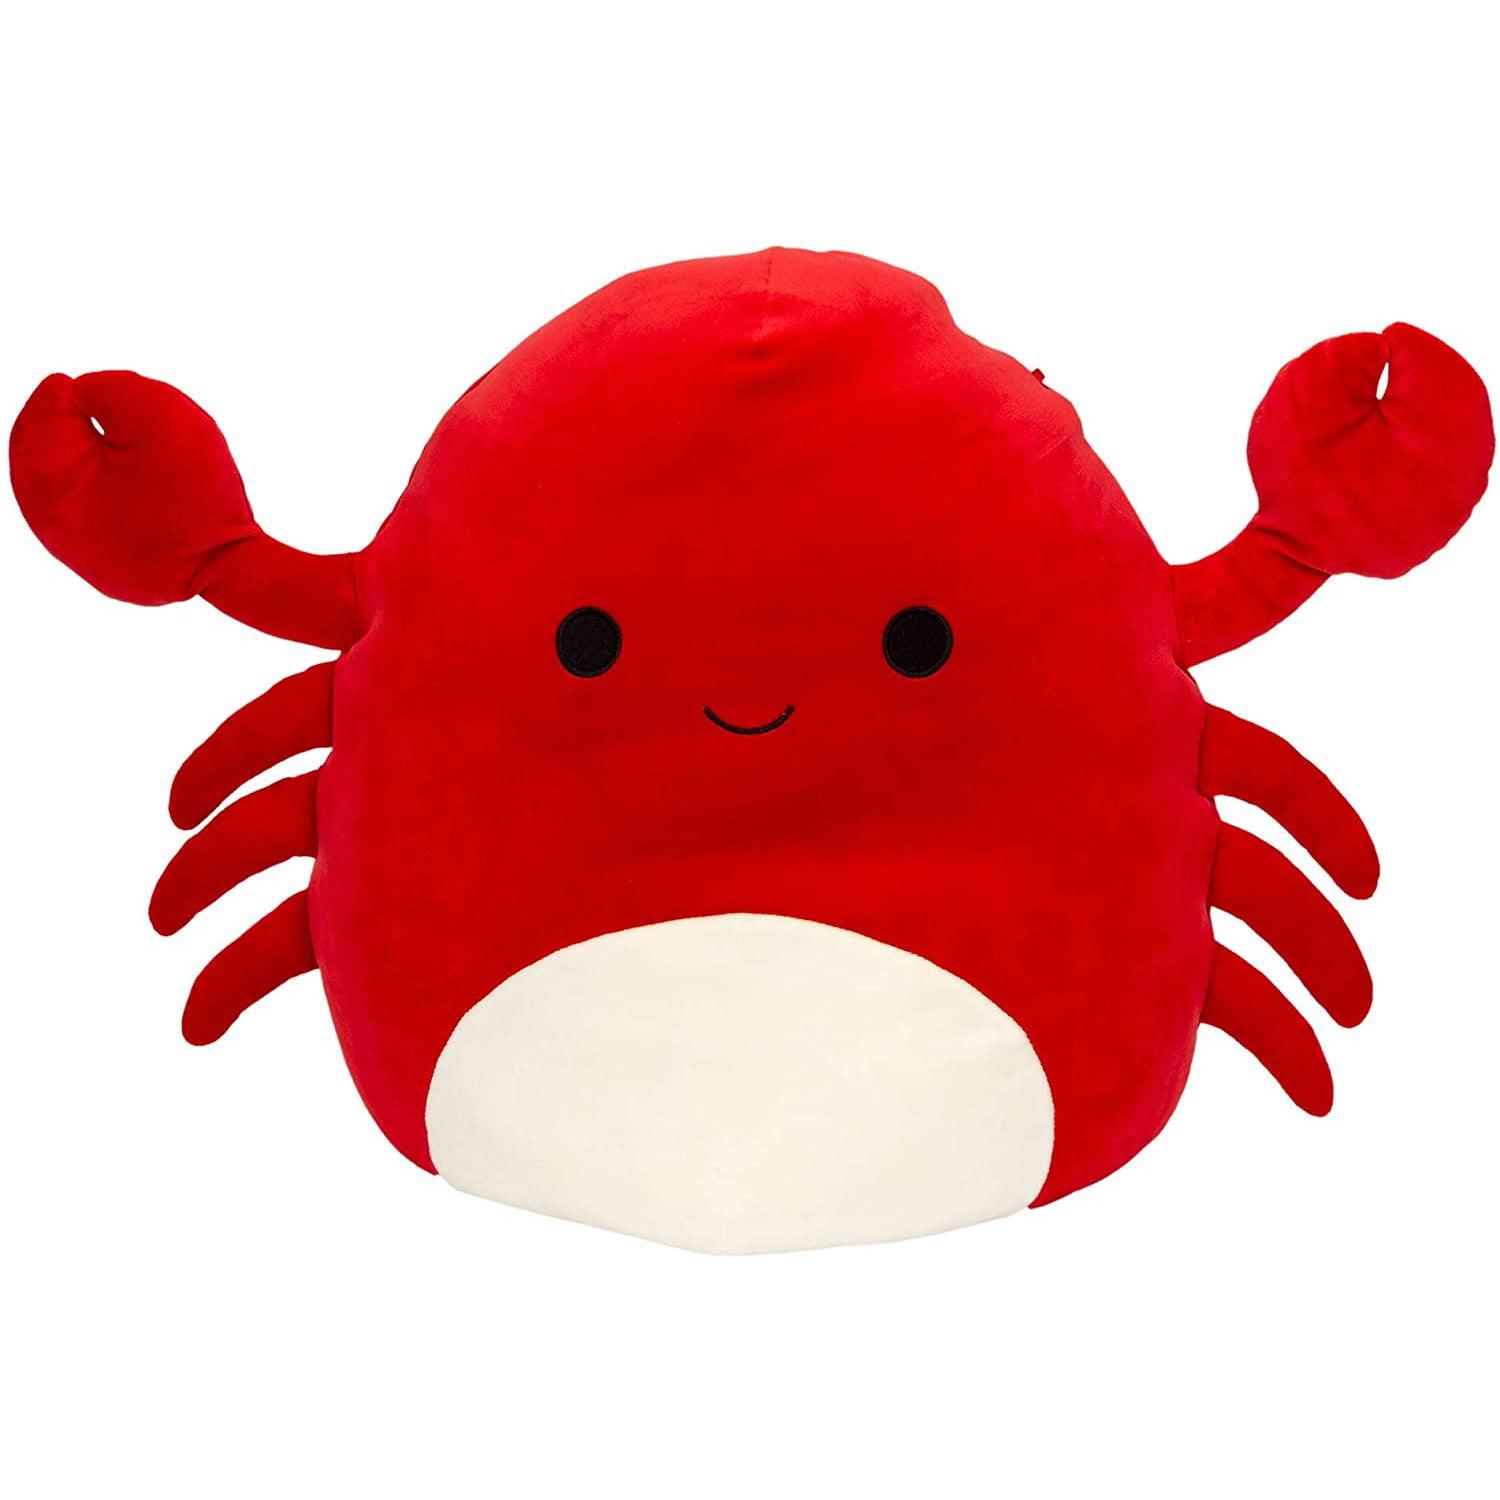 Squishmallow 8 Inch Isolde the Onion Plush Toy